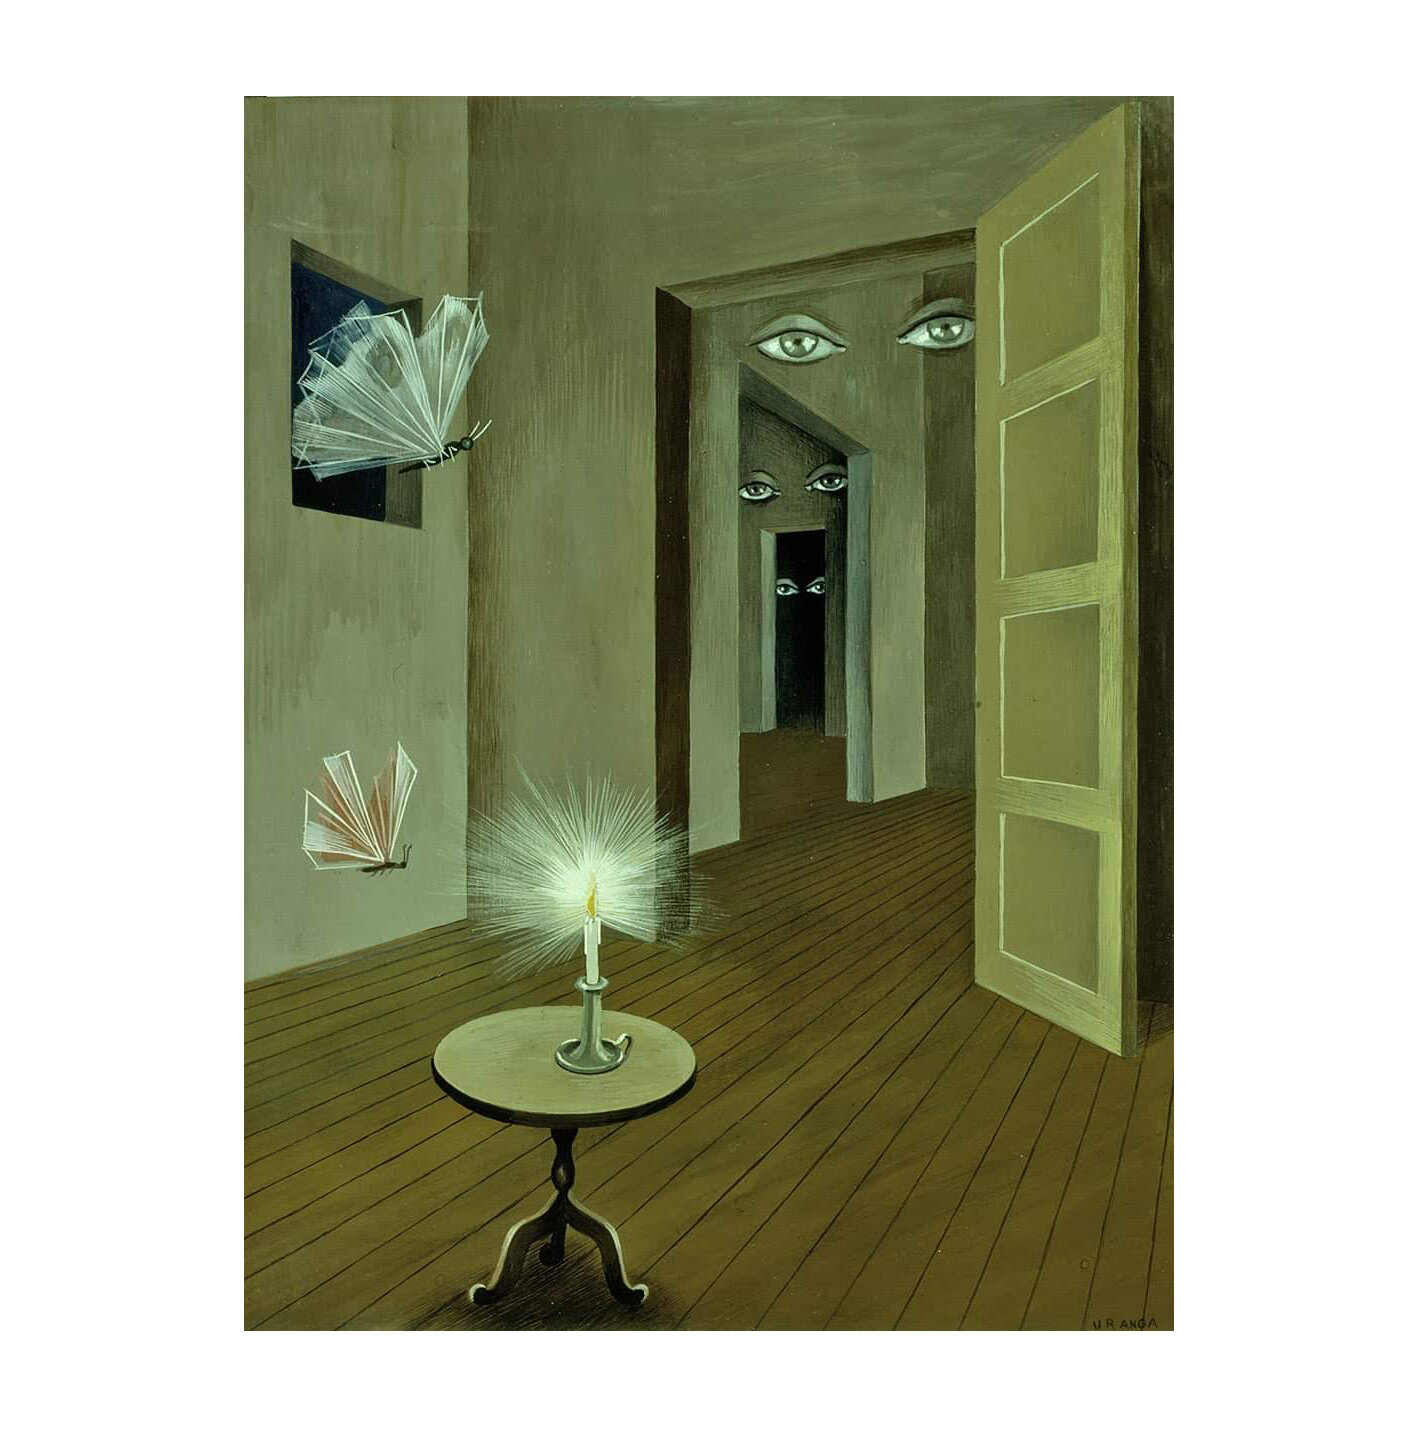  “Insomnia I”, 1947. Gouache on paper by Remedios Varo 